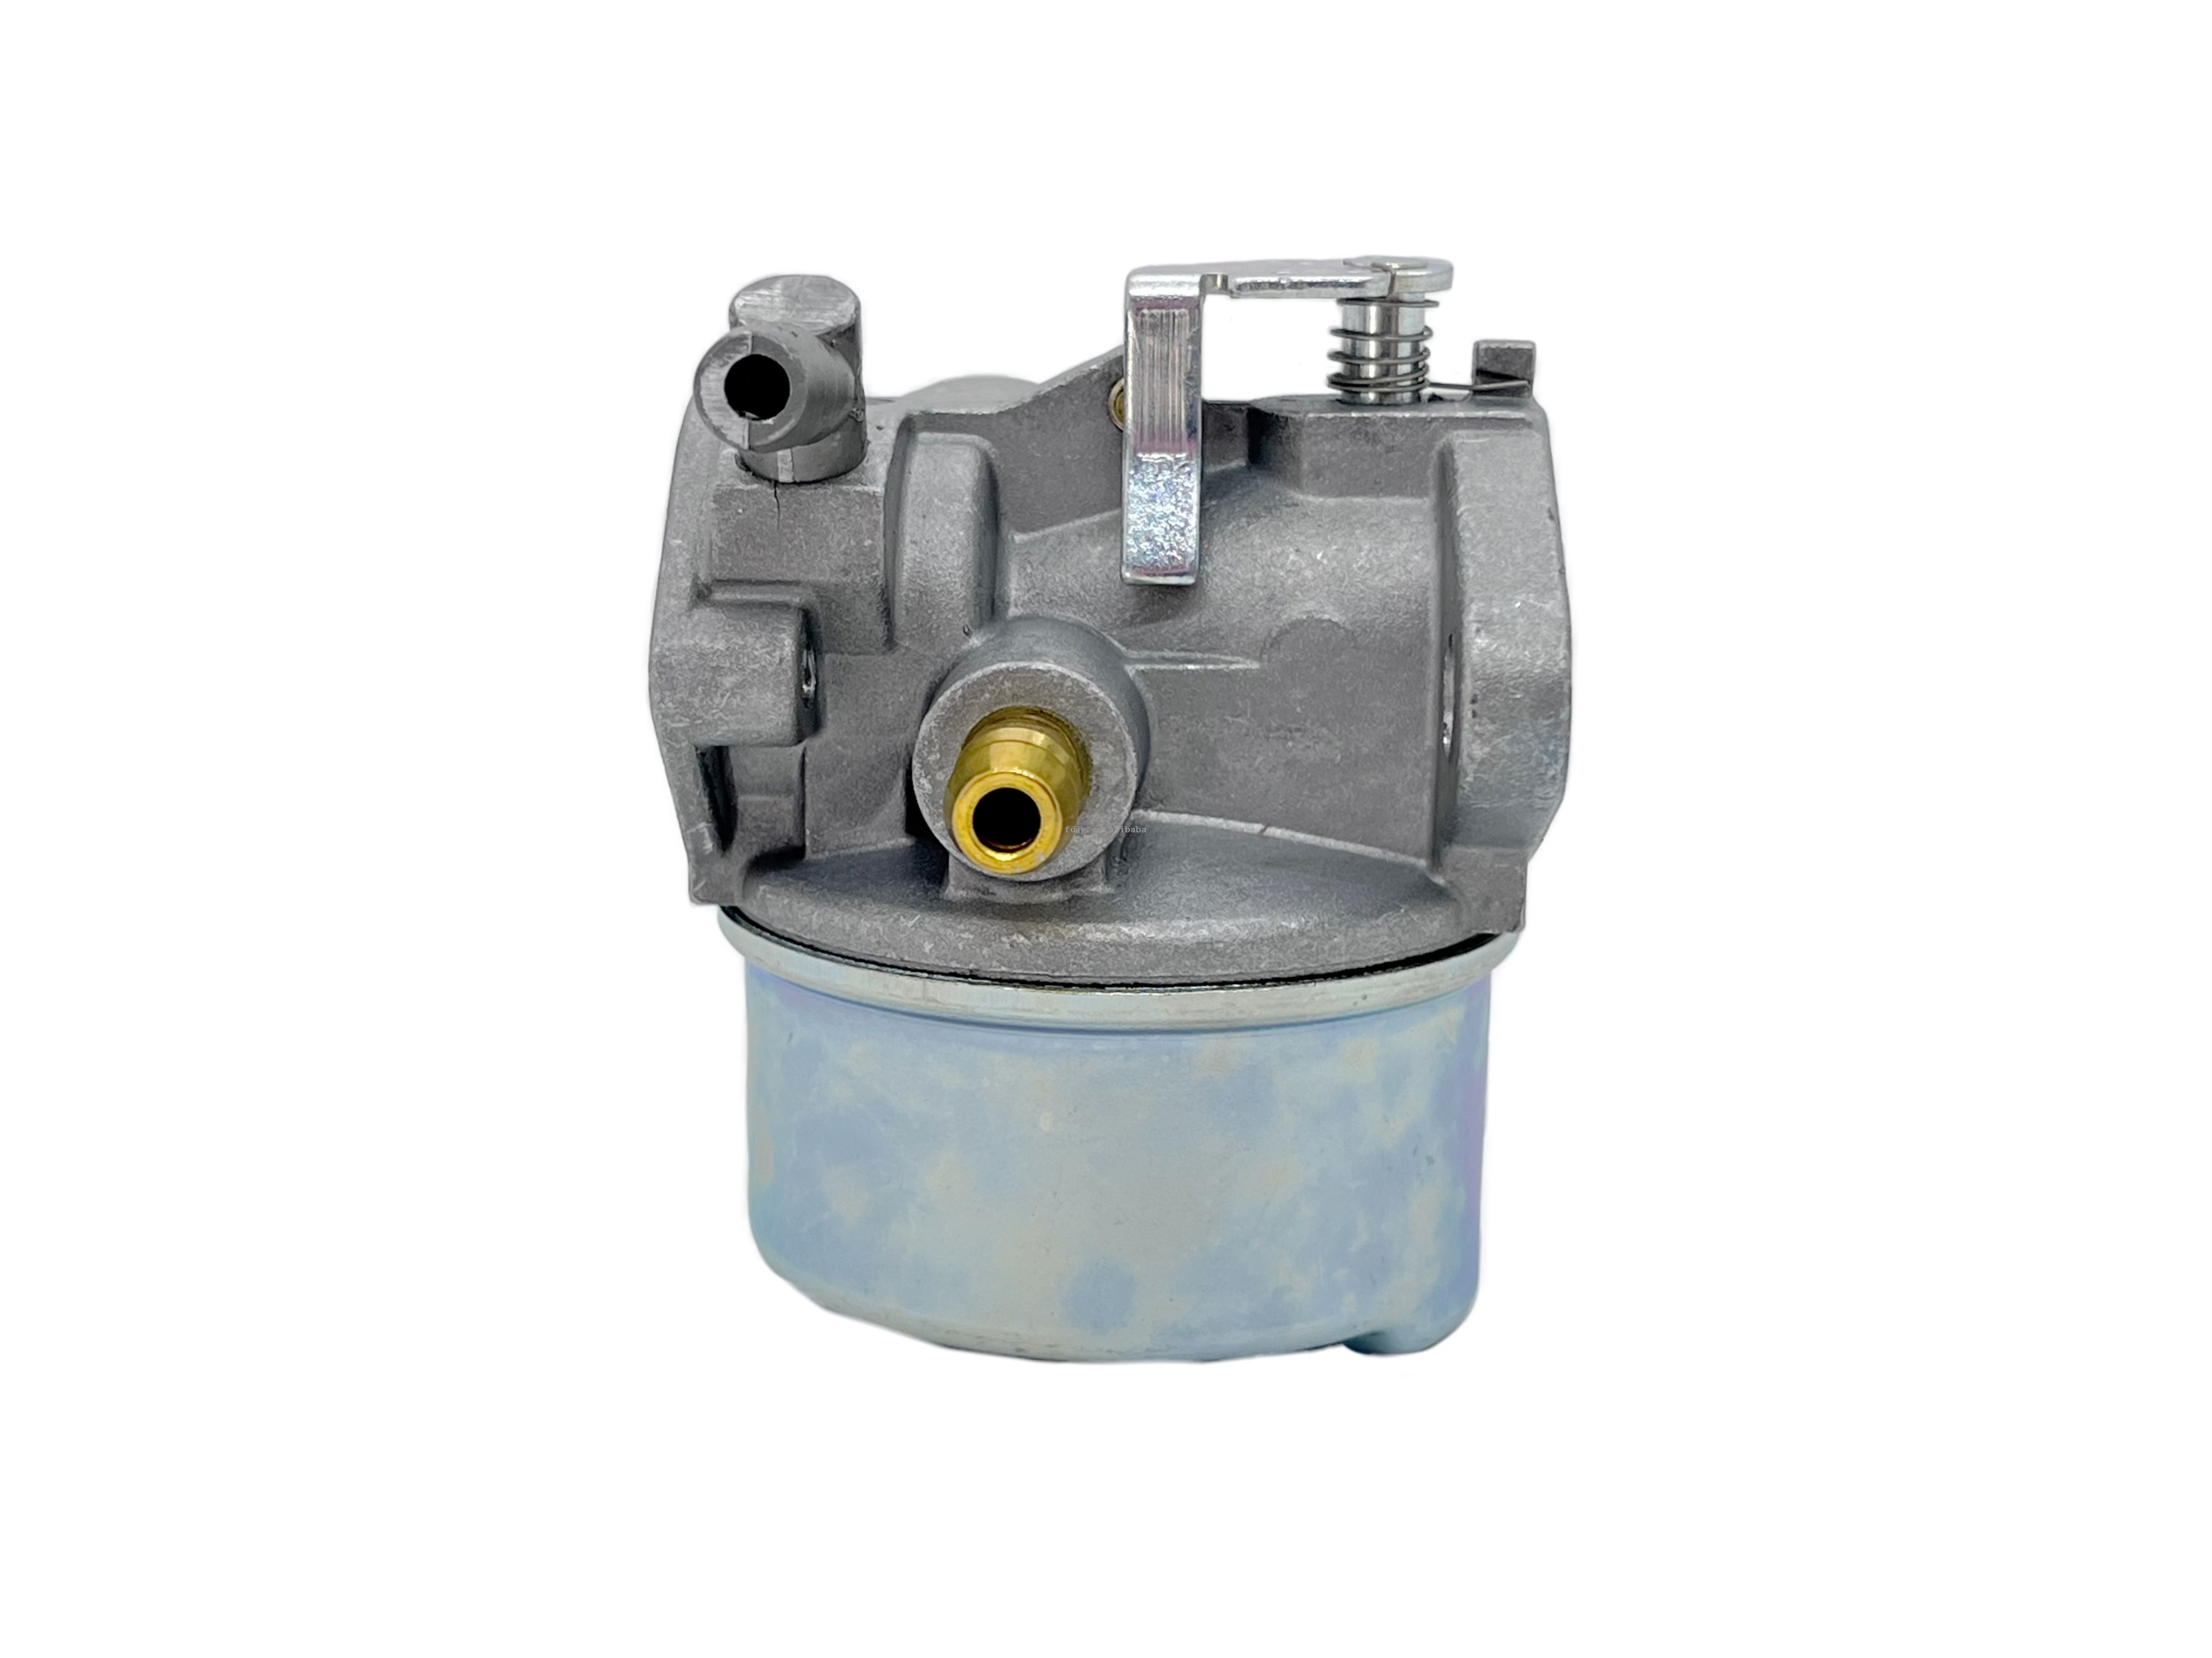 640025 4 Cycle Carb Snow Thrower Pressure Washer Engine Carburetor